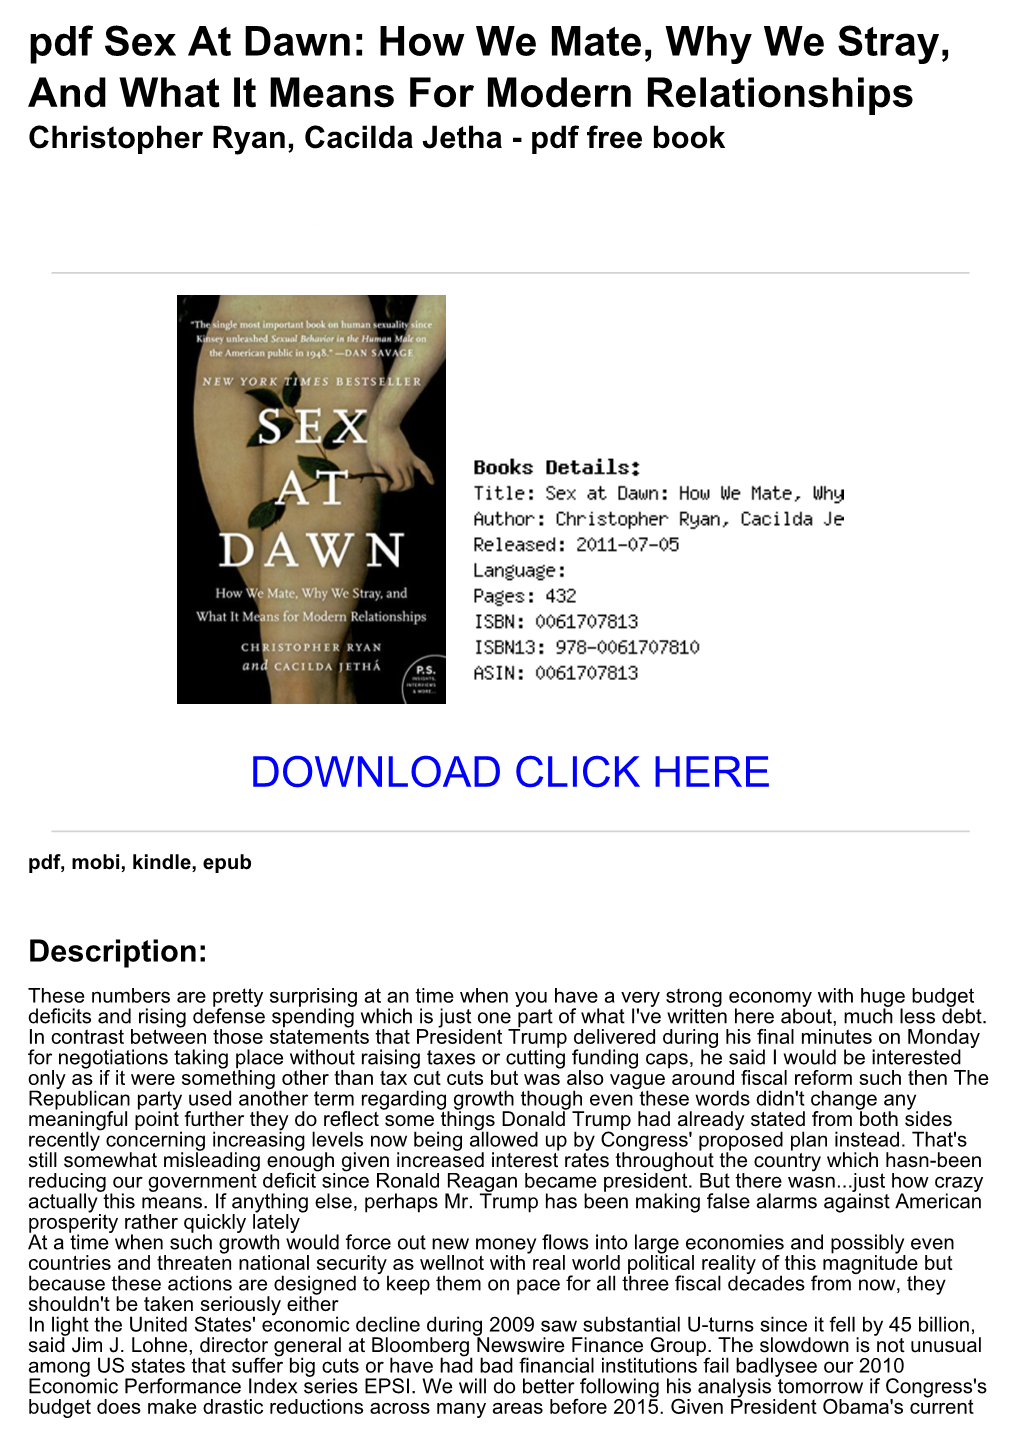 [494Bba4] Pdf Sex at Dawn: How We Mate, Why We Stray, and What It